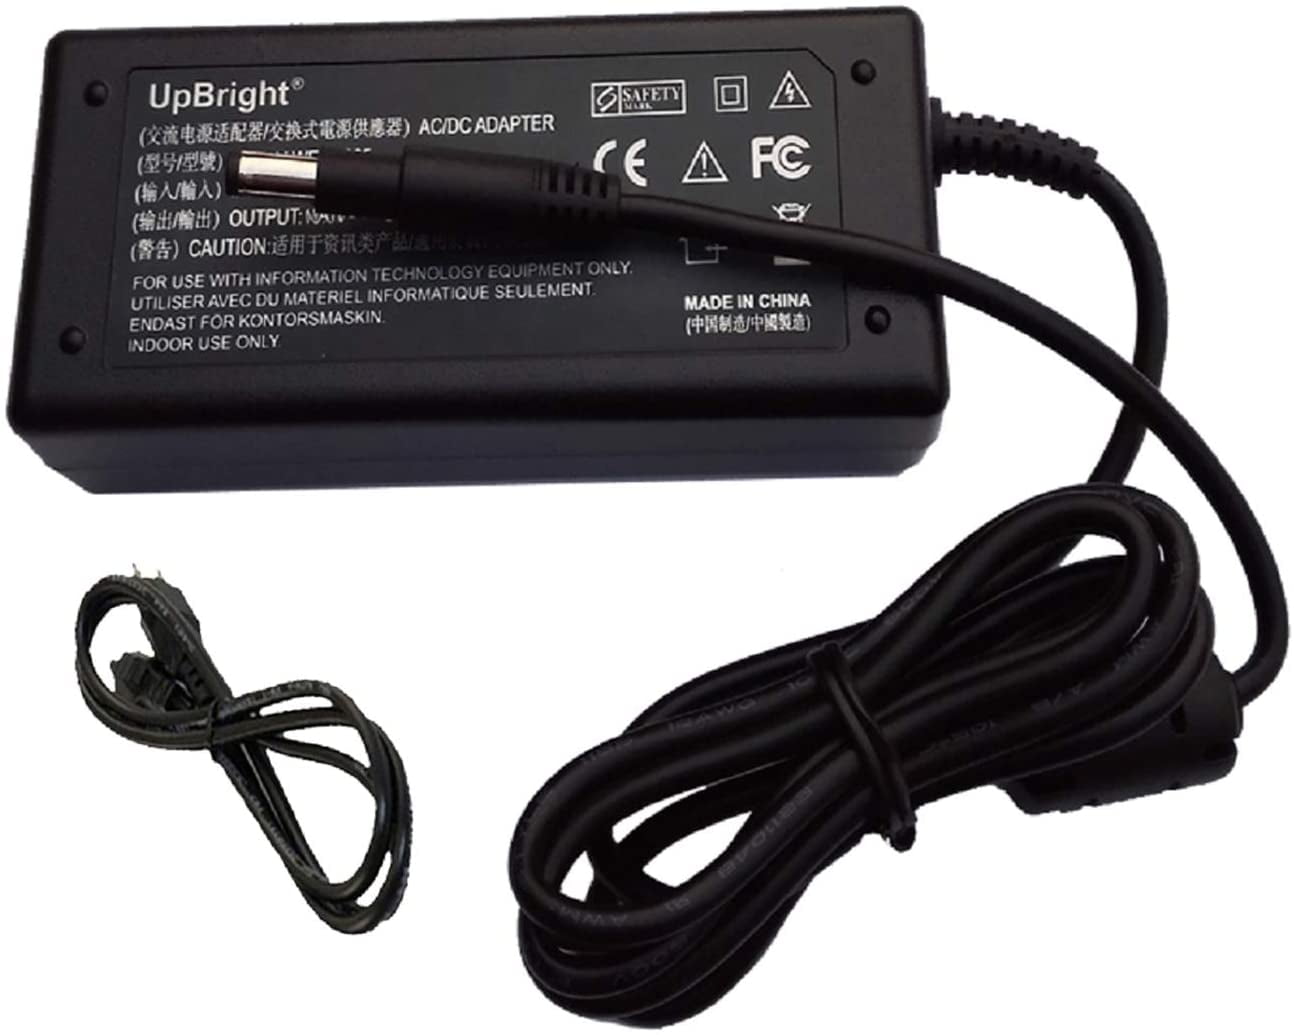 UpBright AC DC Adapter Compatible with Acer ED320 ED320QR Sbiipx ED322QR  Pbmiipx UM.JE0AA.S01 UM.JE0AA.S03 UM.JE0EE.P04 31.5” UM.JE2AA.P01 HD LCD  Curved Gaming Monitor Power SupplyCord Cable Charger 